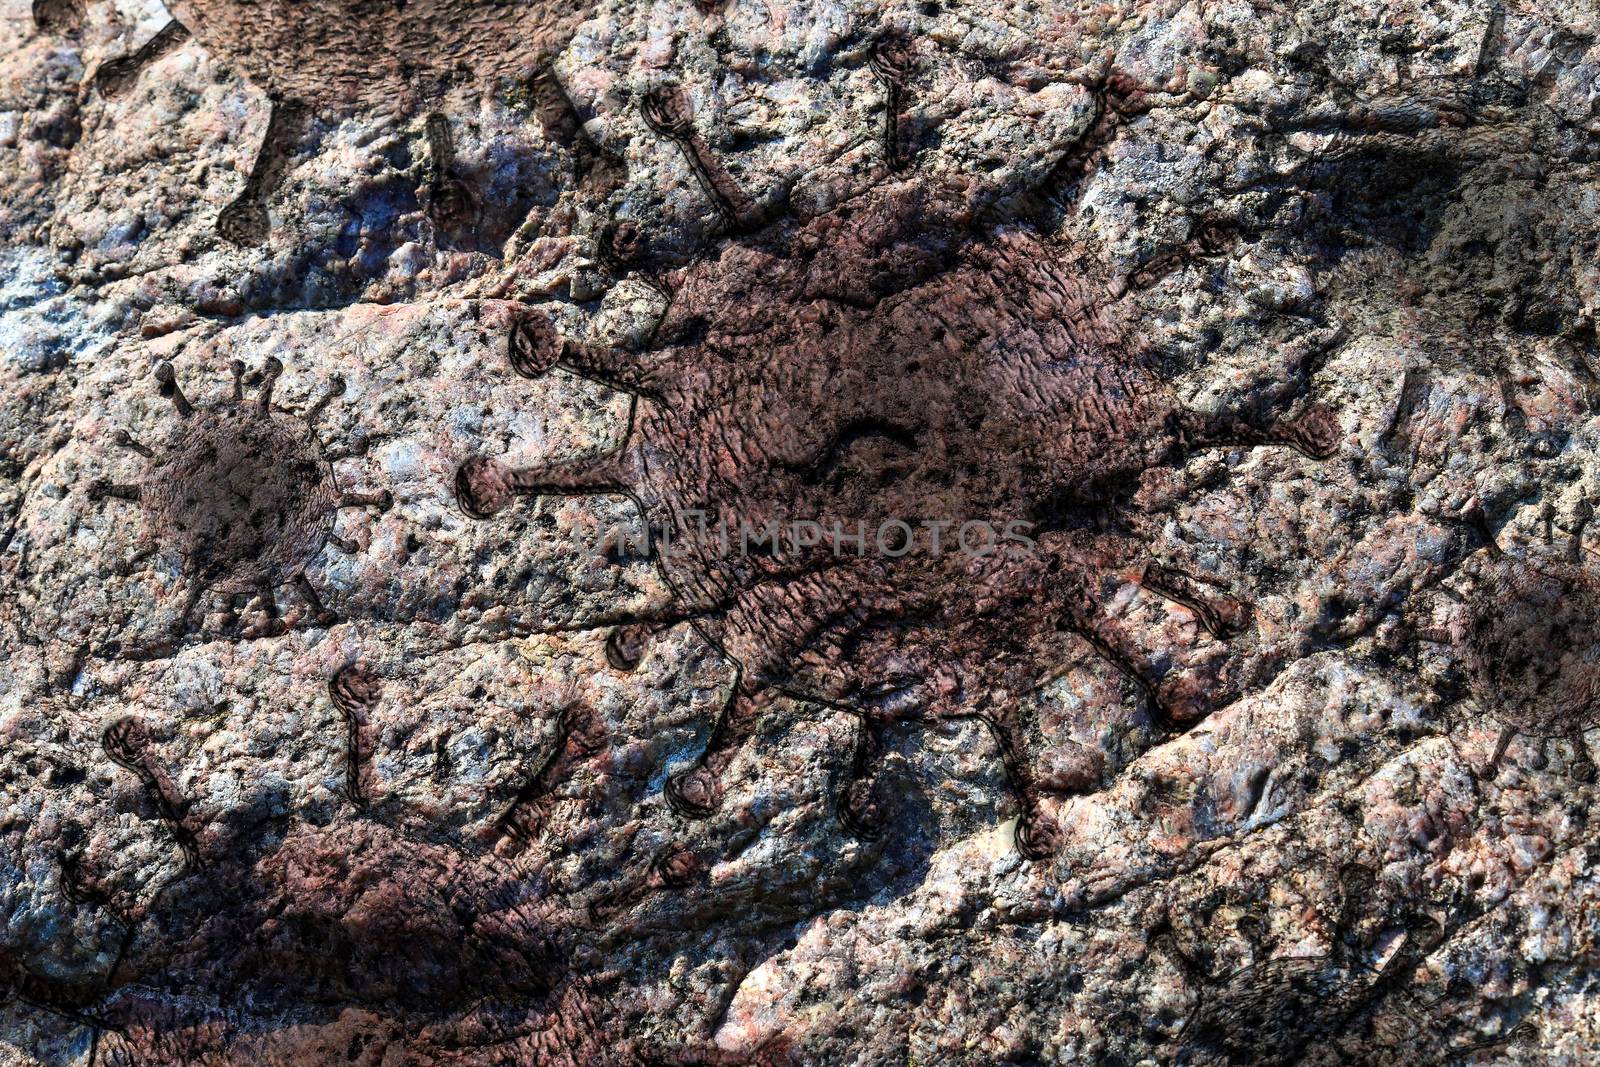 Old stone and rock textures with some virus fossil virus visualization.